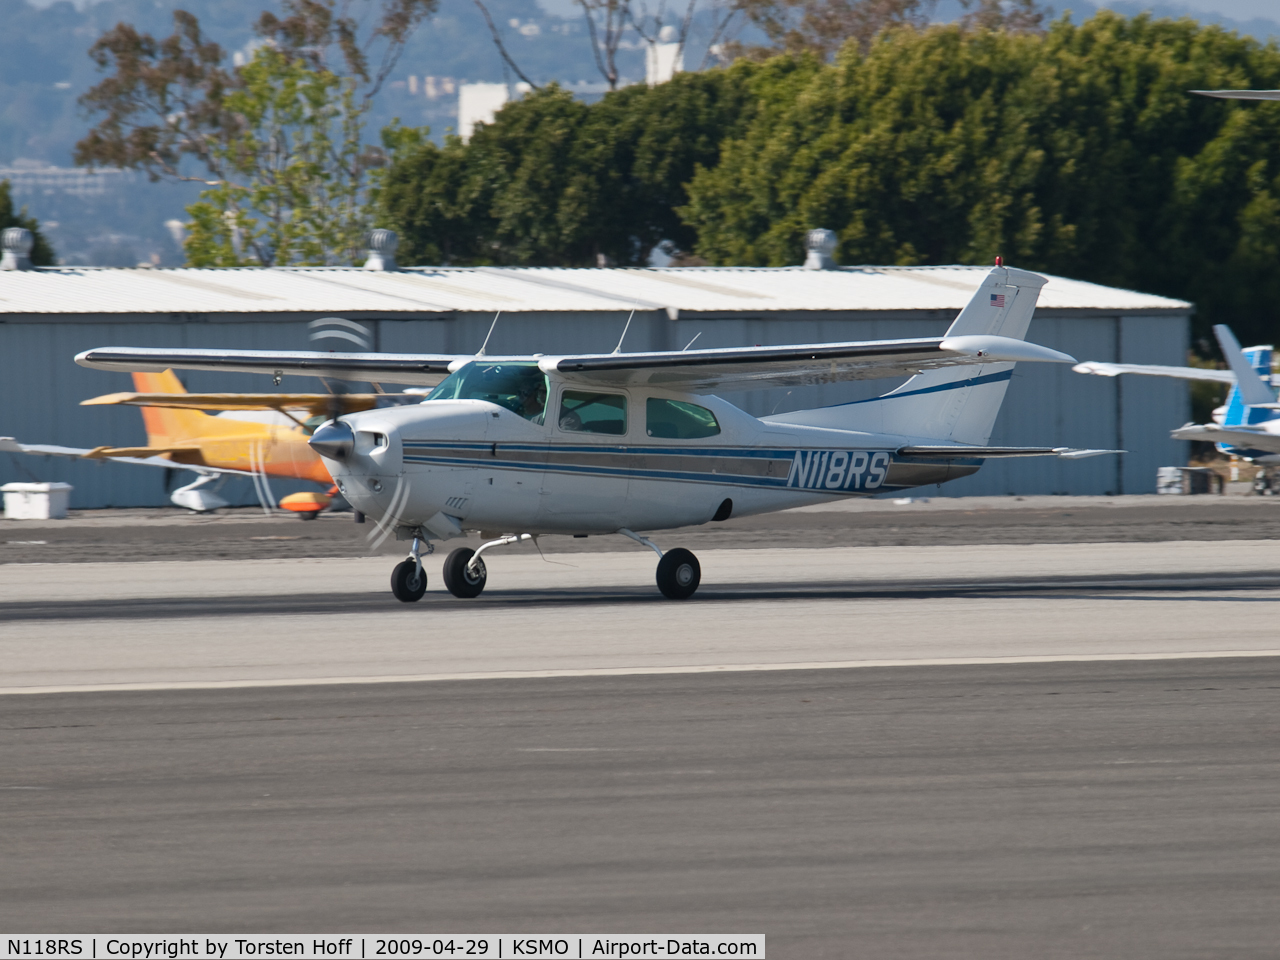 N118RS, 1974 Cessna T210L Turbo Centurion C/N 21060583, N118RS departing from RWY 21